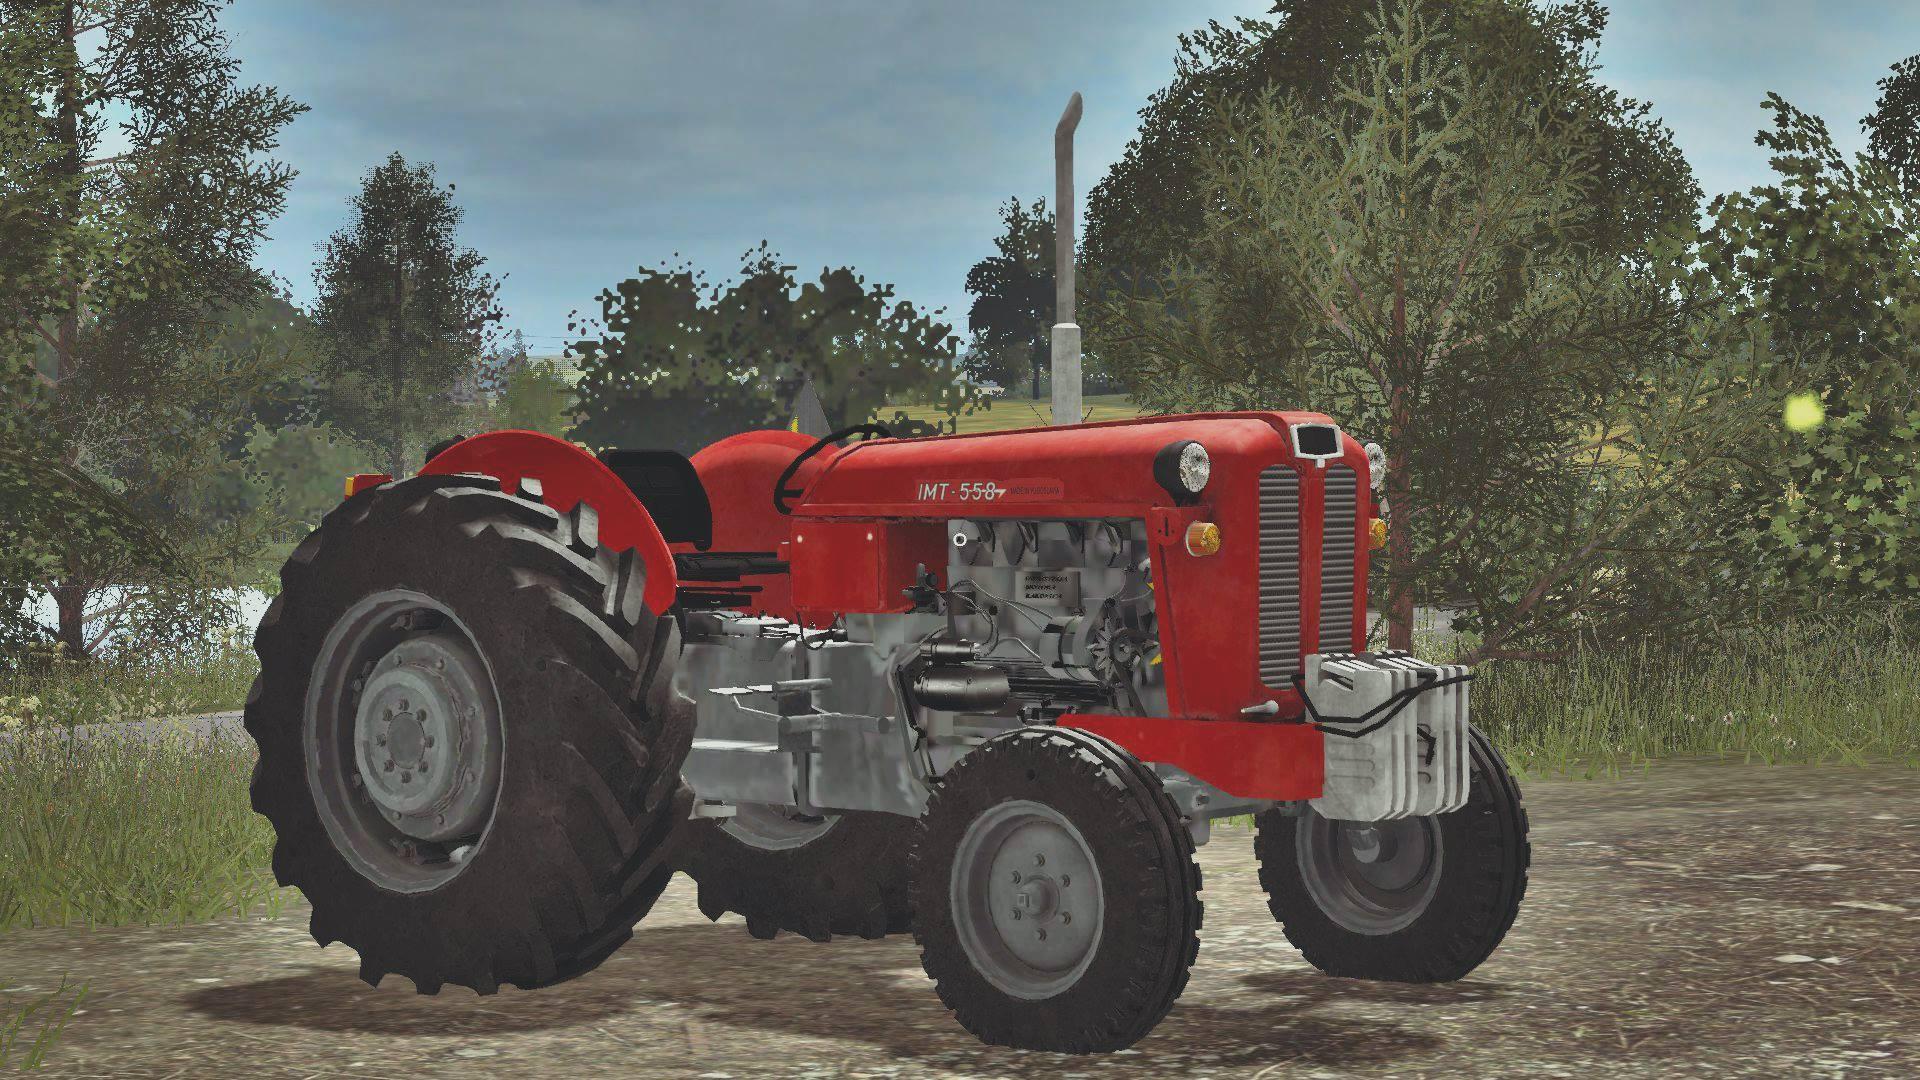 FS17 - Imt 558 Tractor V2.0 Final